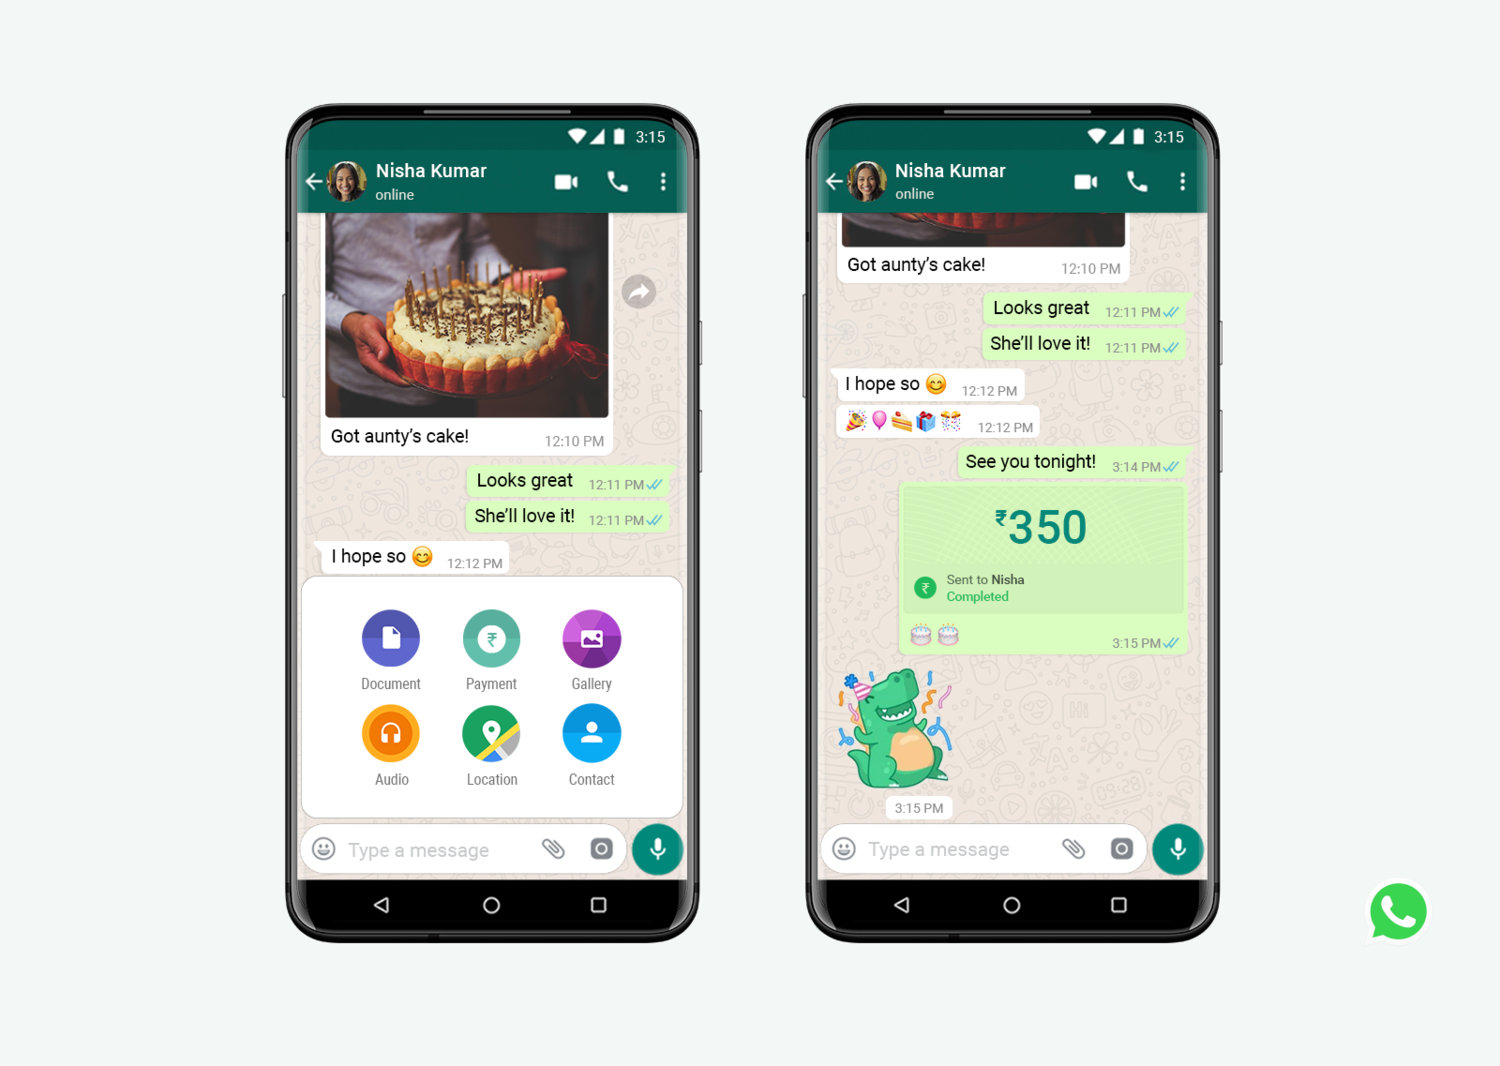 Download latest WhatsApp payment APK